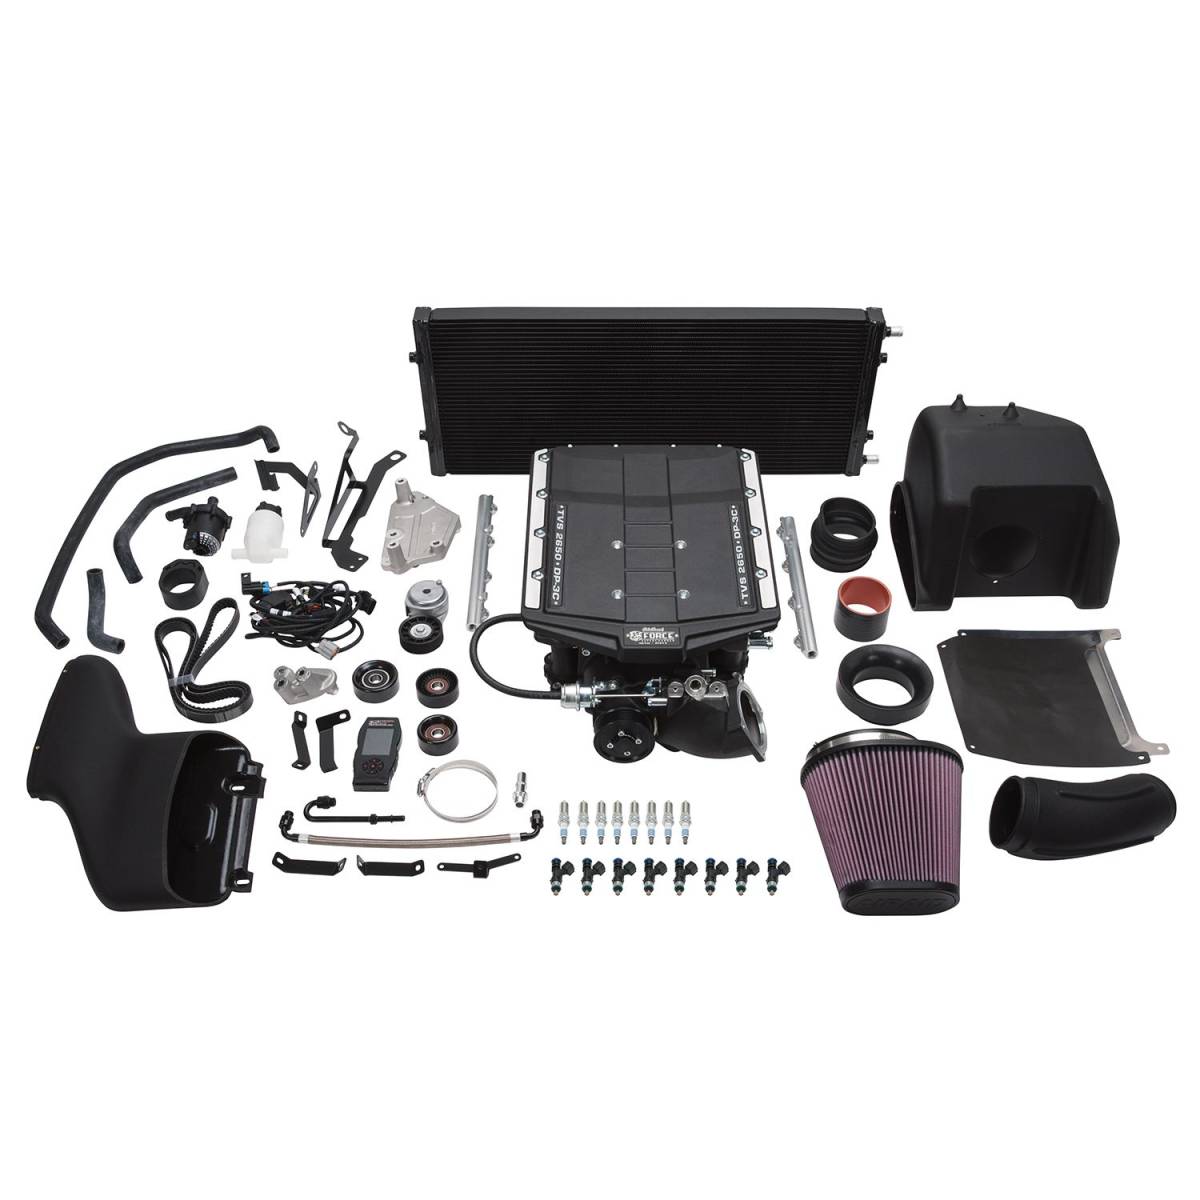 Edelbrock - Ford F-150 Coyote 5.0L 2015-2017 Edelbrock Stage 1 Complete Supercharger Intercooled Kit Without Tune - Image 1